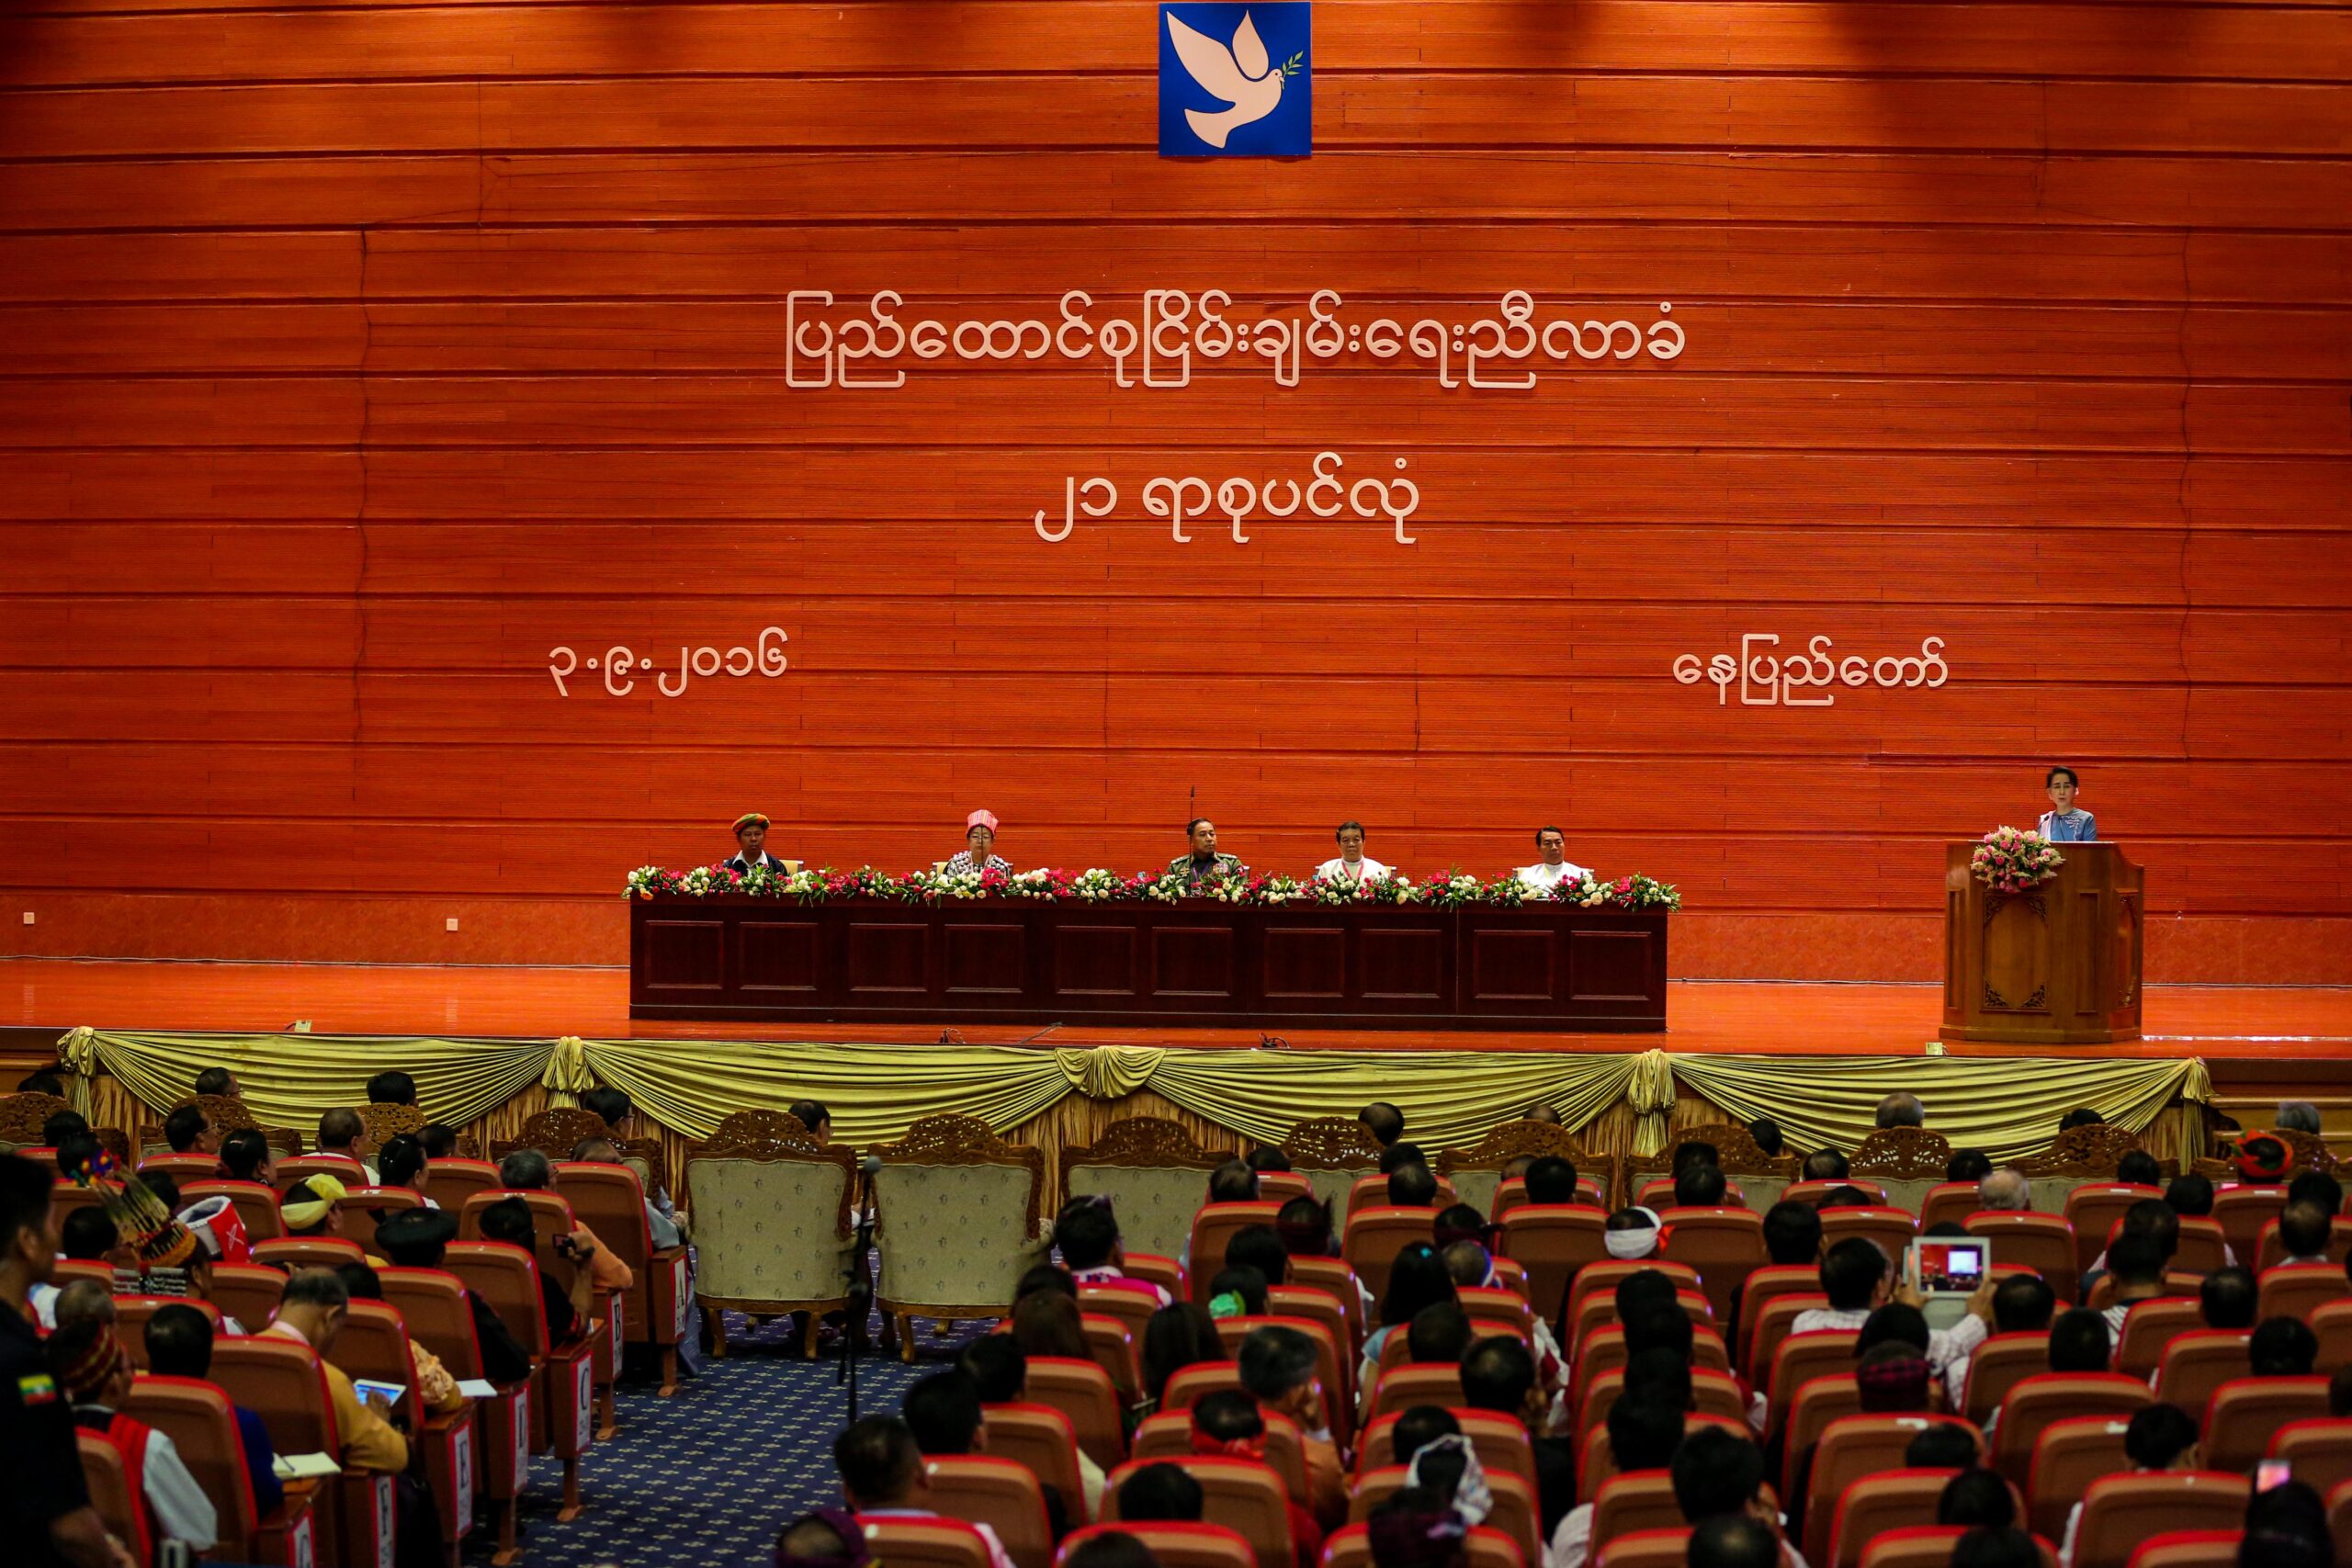 State Counselor Daw Aung San Suu Kyi delivers a closing address at the 21st Century Panglong peace conference on Sept 3 this year. (Photo: Pyay Kyaw / The Irrawaddy)